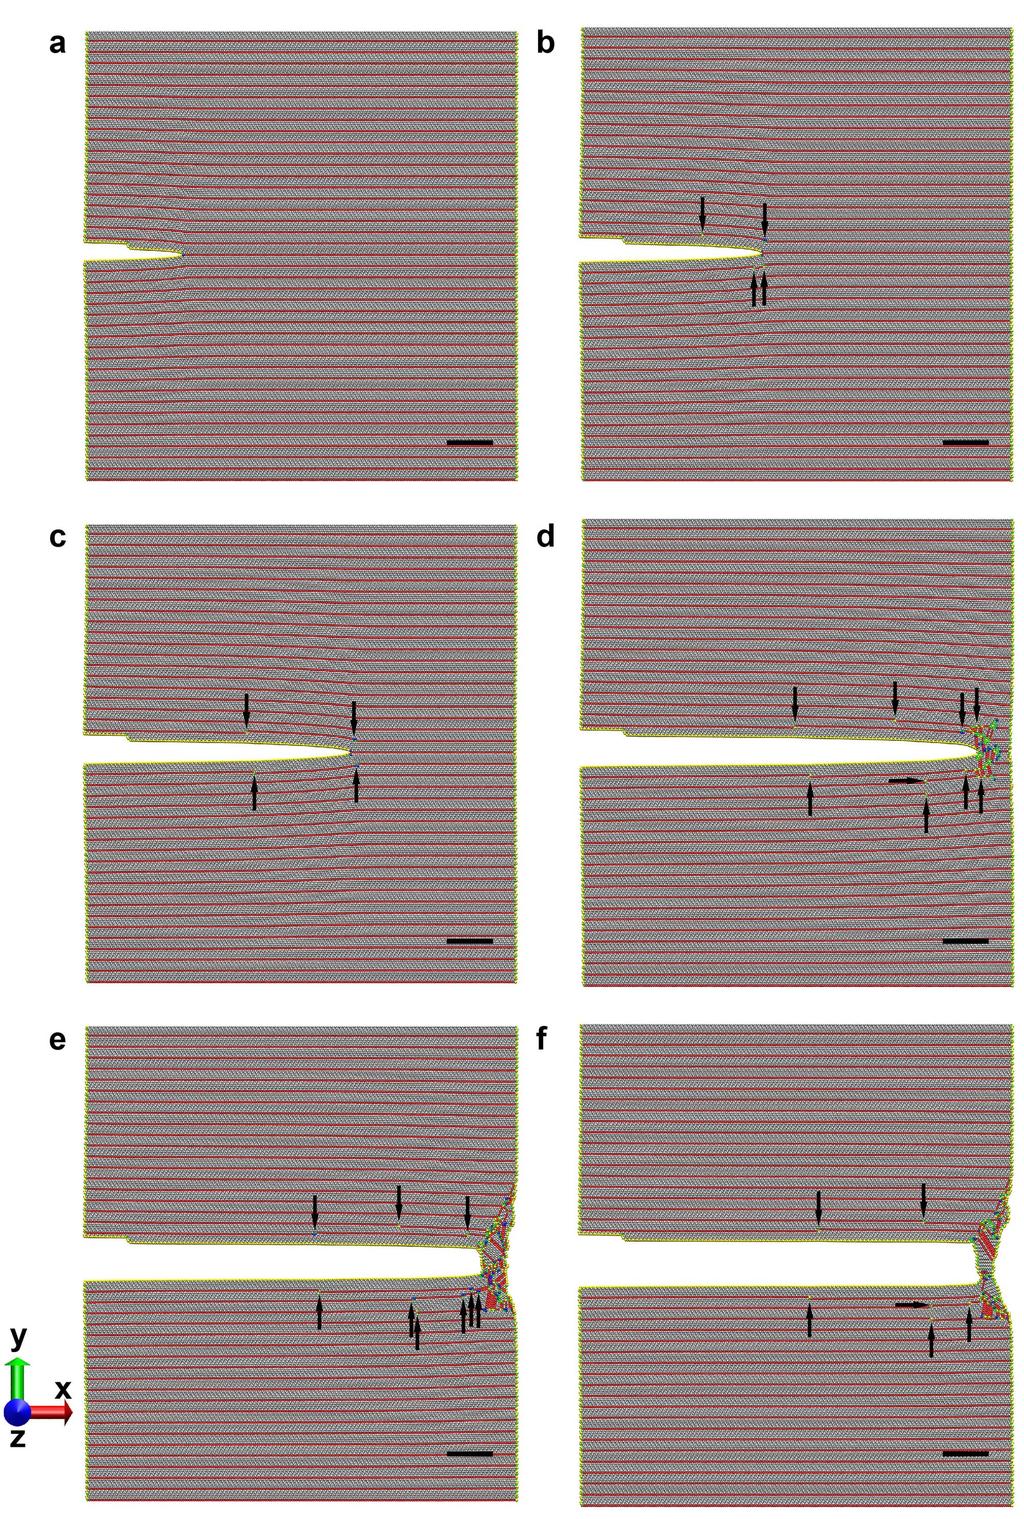 Supplementary Figure S7. Snapshots of crack propagation in nanotwinned Cu with twin boundary spacing of 1.25 nm at different strains. a, =3.56%. b, =4.60%. c, =5.65%. d, =7.79%. e, =9.42%. f, =11.18%.